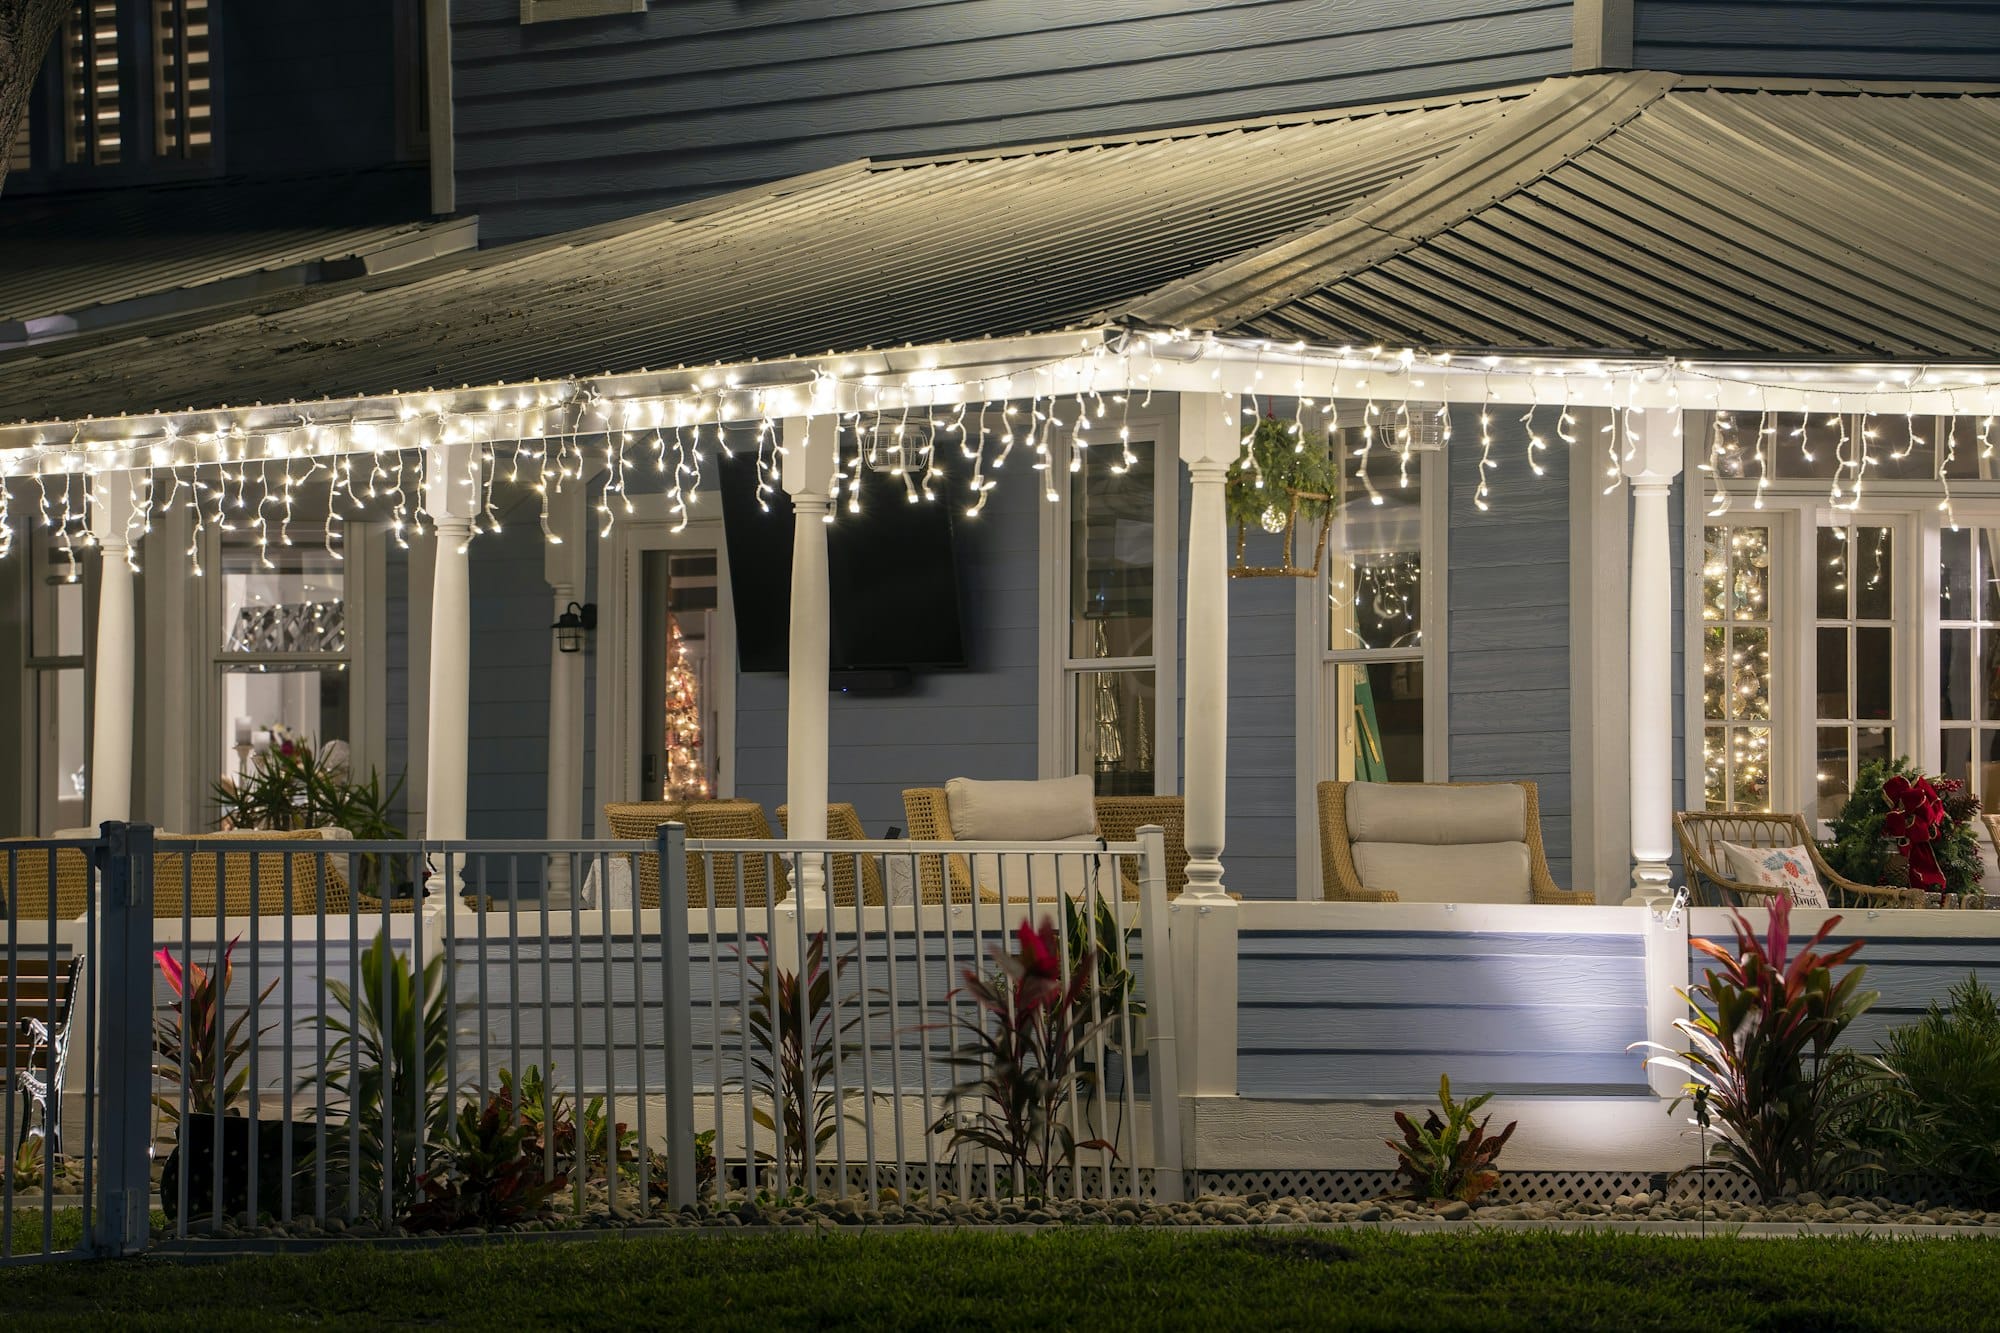 House front yard with big porch brightly illuminated with christmas decorations.